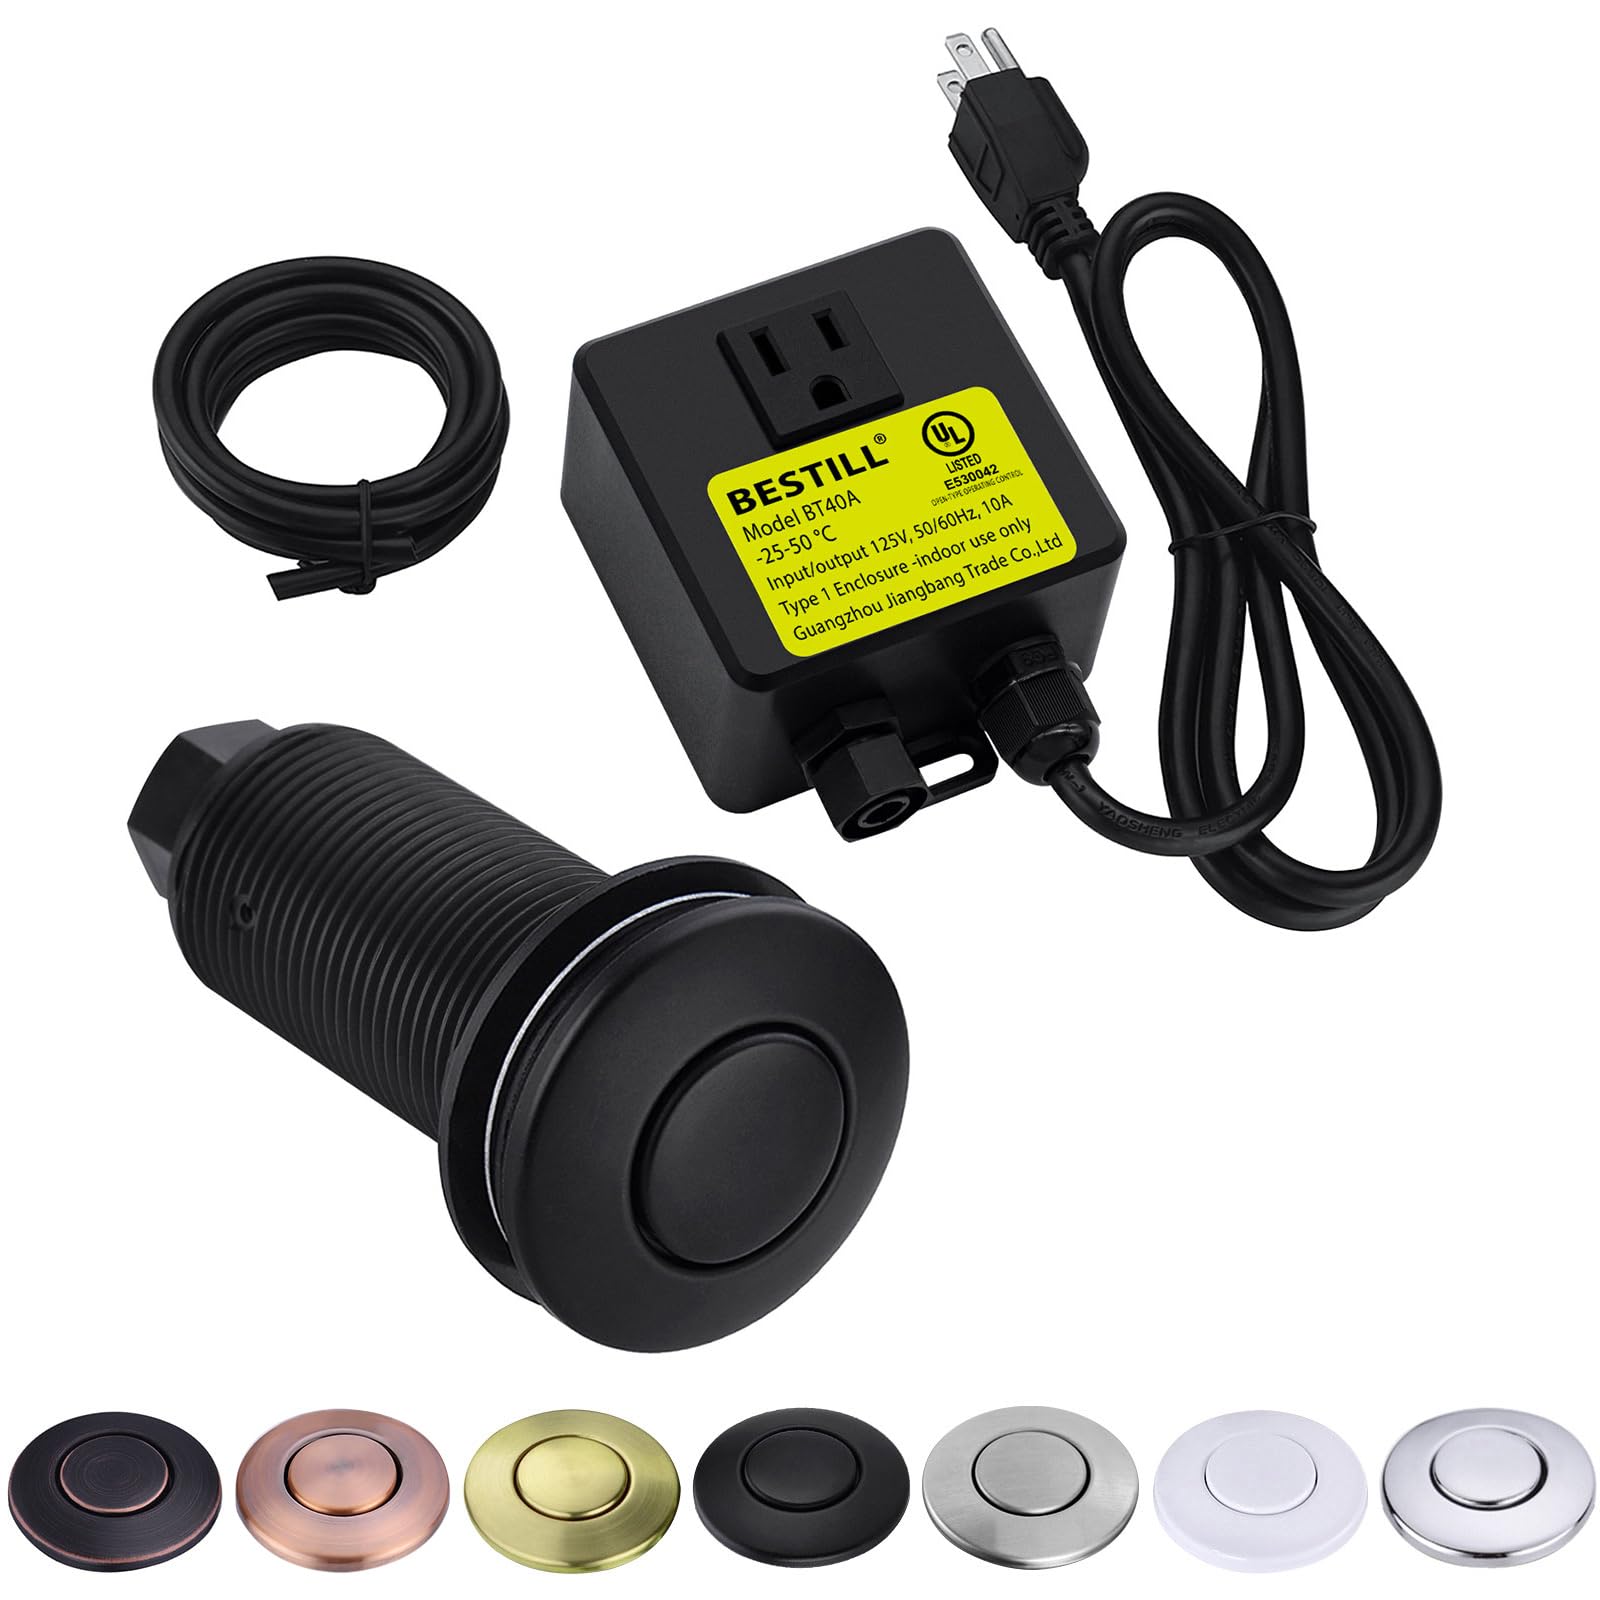 BESTILL Sink Top Garbage Disposal Air Switch Kit, Matte Black (Long Push Button with Brass Cover), UL Listed(E530042)